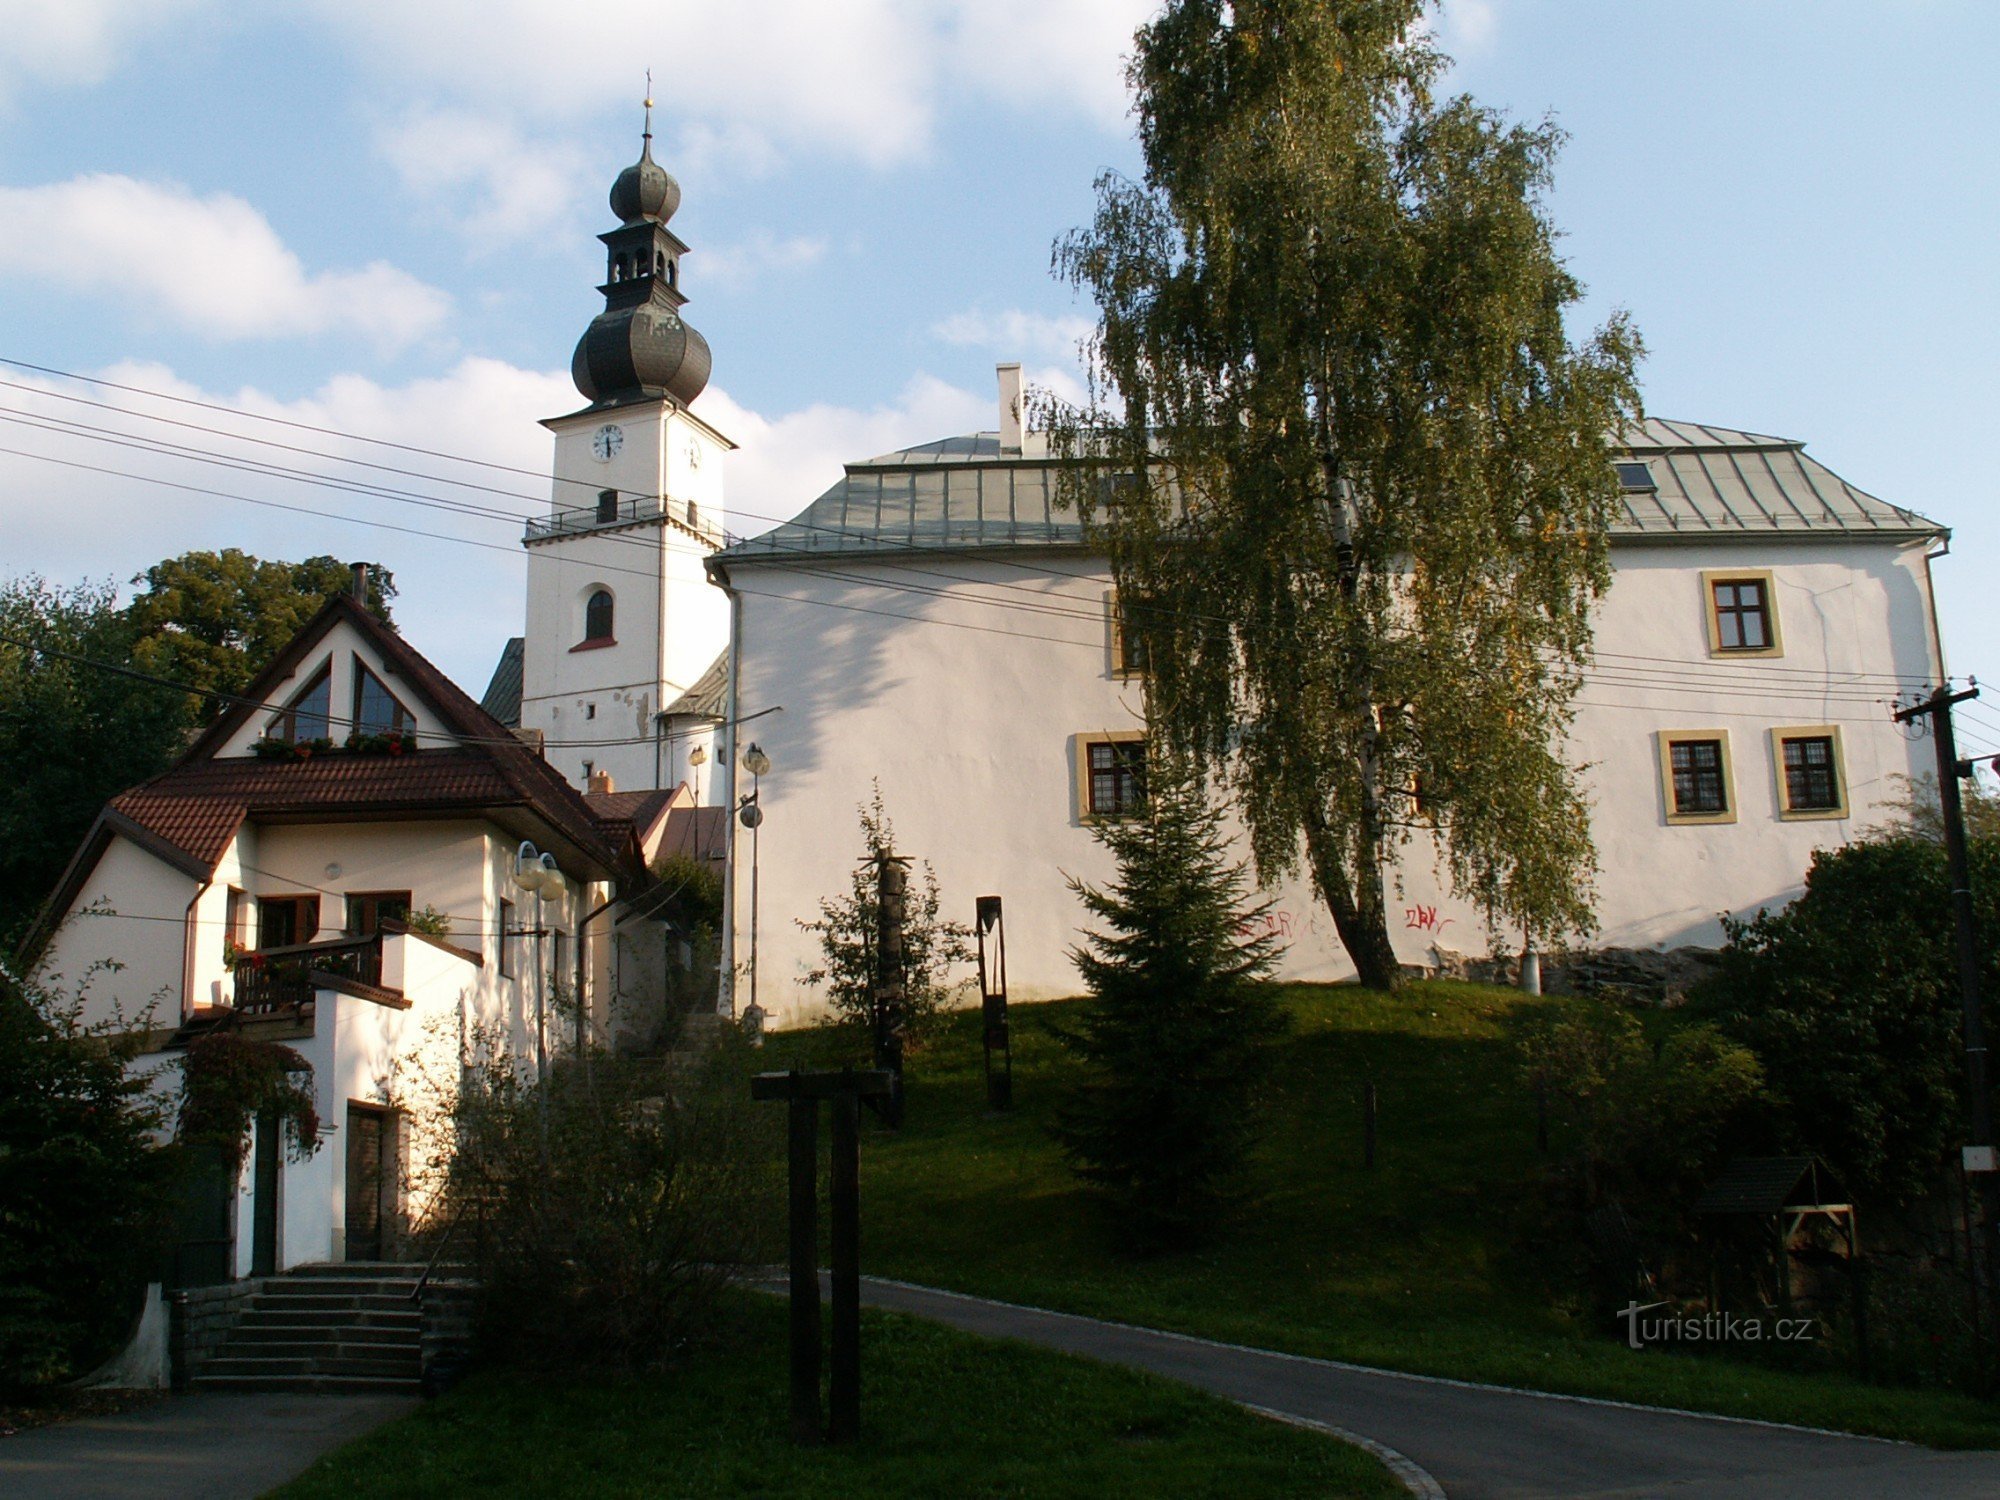 A fortress with a regional museum. In the background the church of St. Procopius